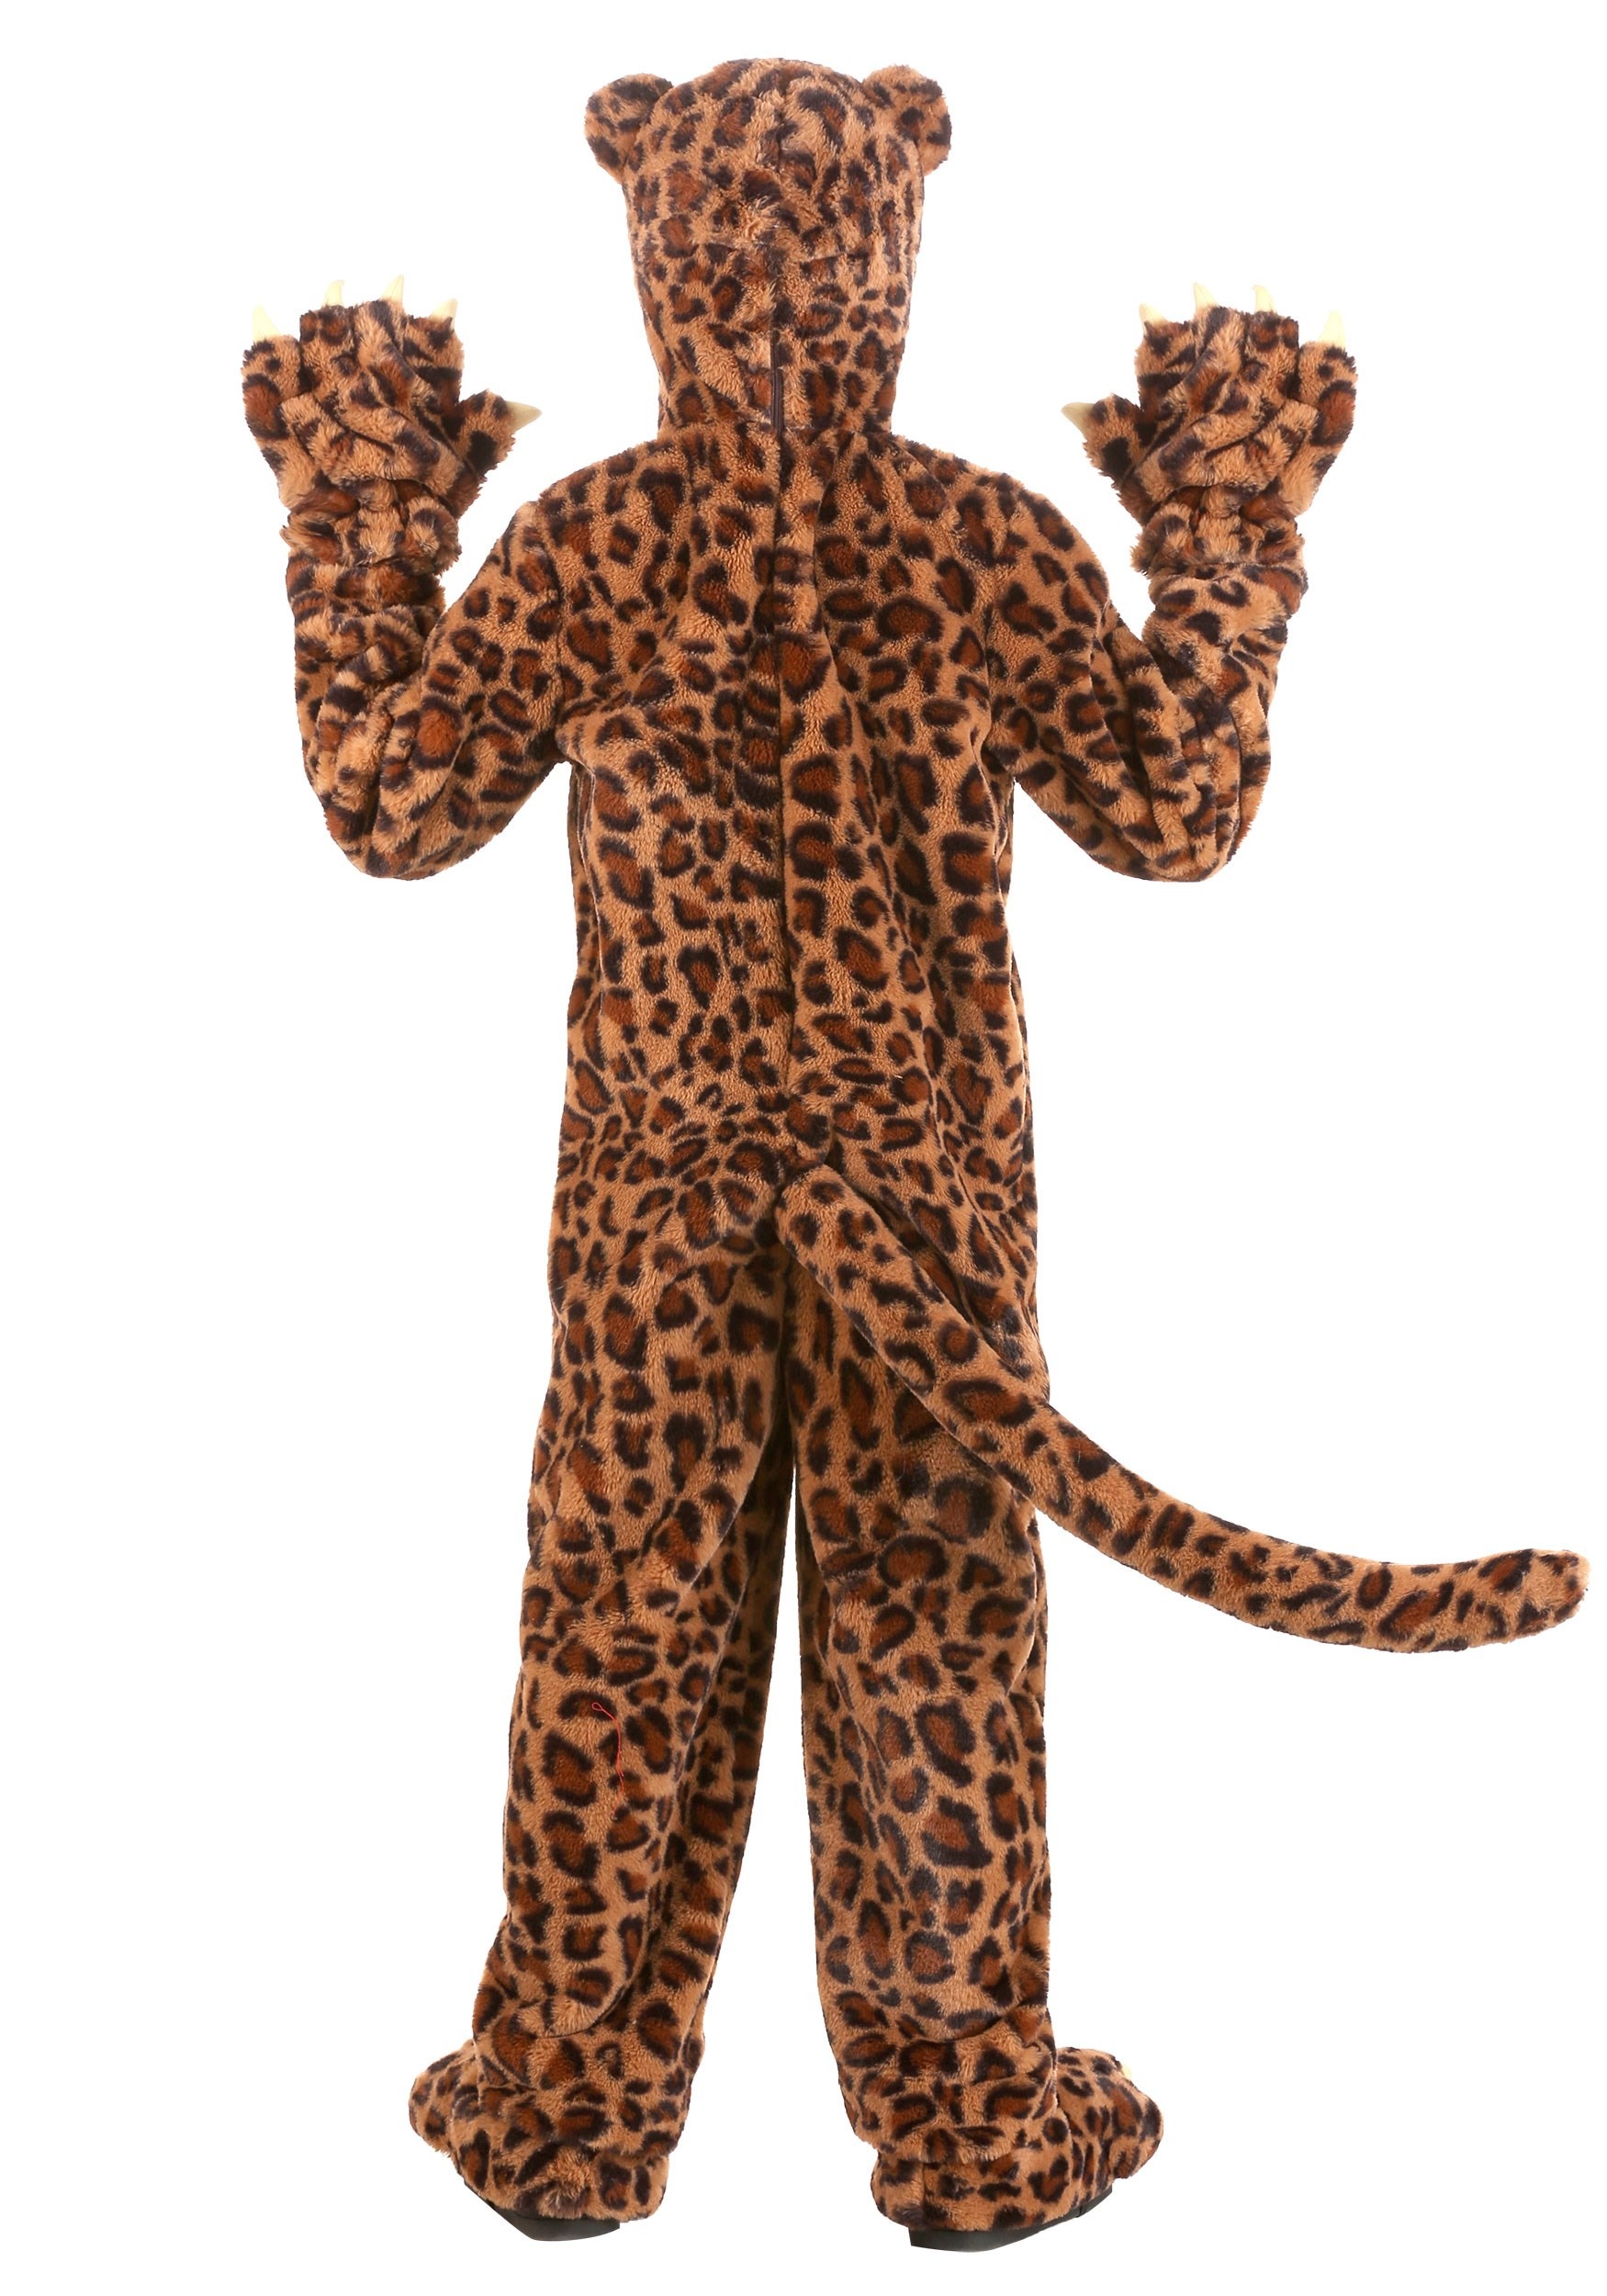 Leapin' Leopard Costume For Child